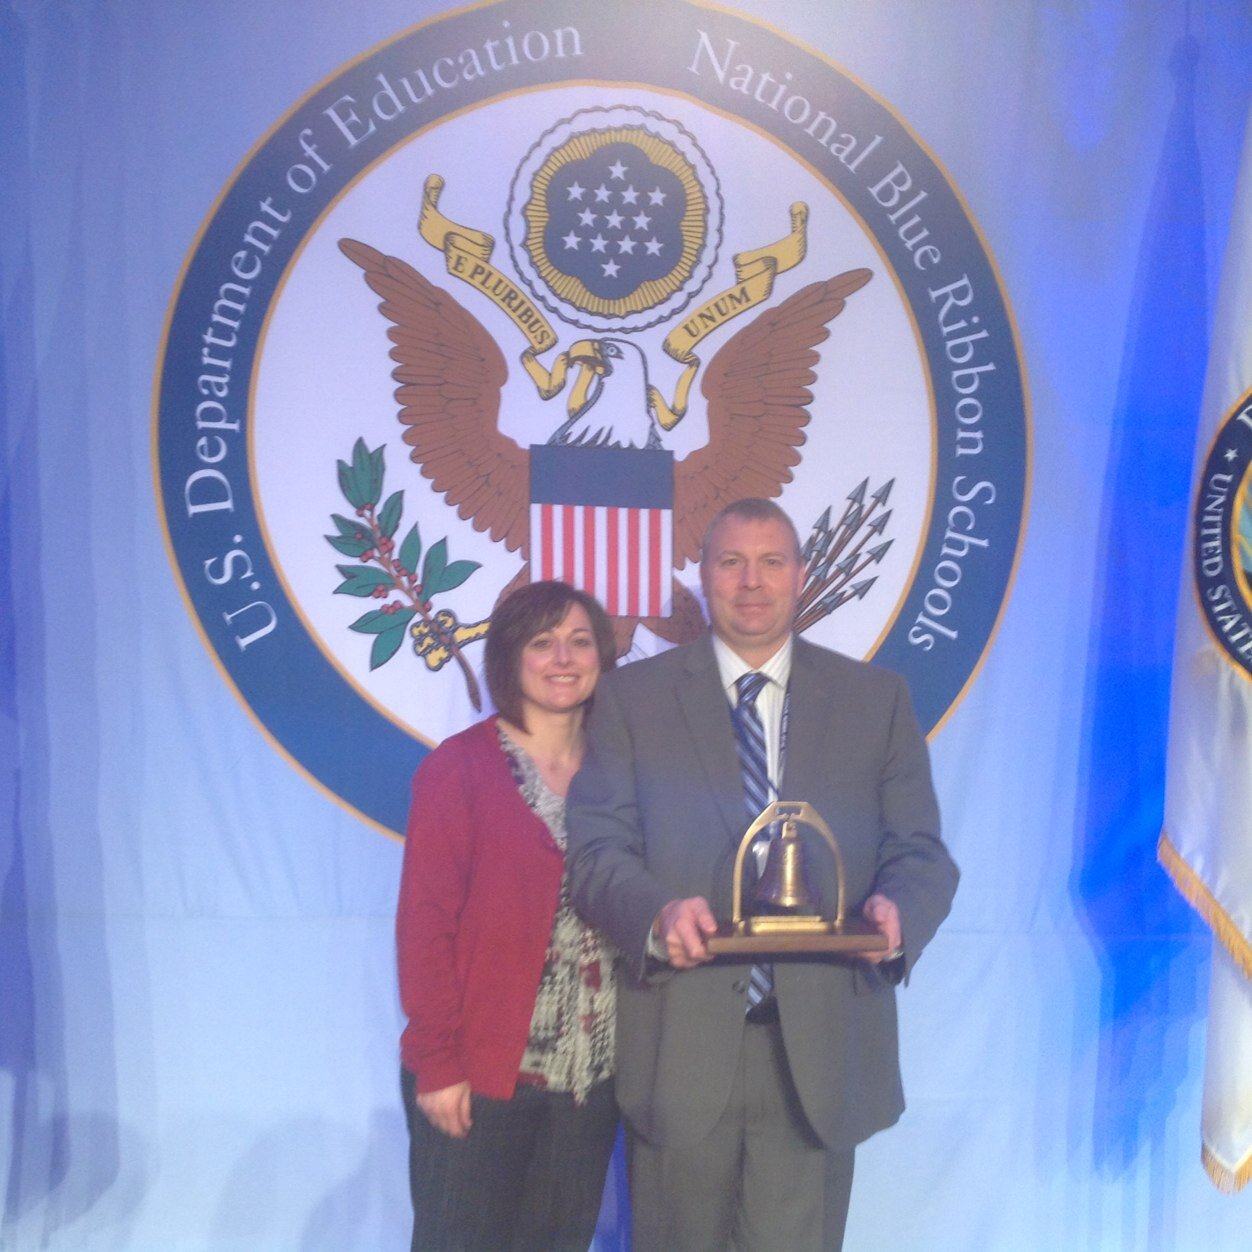 2014 Idaho Secondary Principal of the Year.  Recipient of the Terrell H. Bell Award from the US Department of Education.  SSHS-National Blue Ribbon School